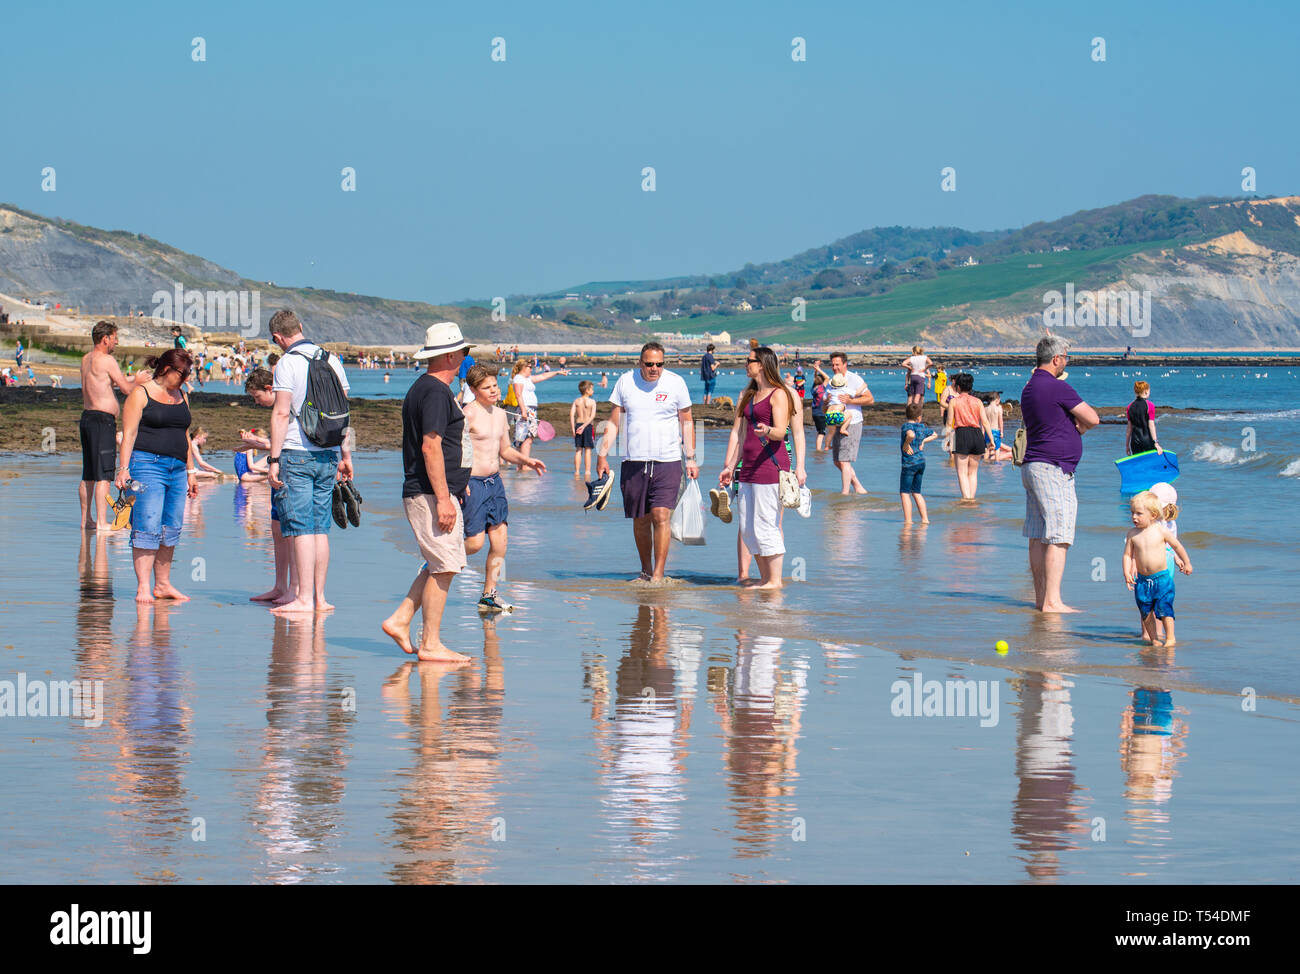 Lyme Regis, Dorset, UK. 20th April 2019. UK Weather: Beachgoers cool down in the sea at the seaside resort of Lyme Regis on a scorching hot Easter Saturday afternoon,  Families enjoy paddling in the sea. Credit: Celia McMahon/Alamy Live News. Stock Photo